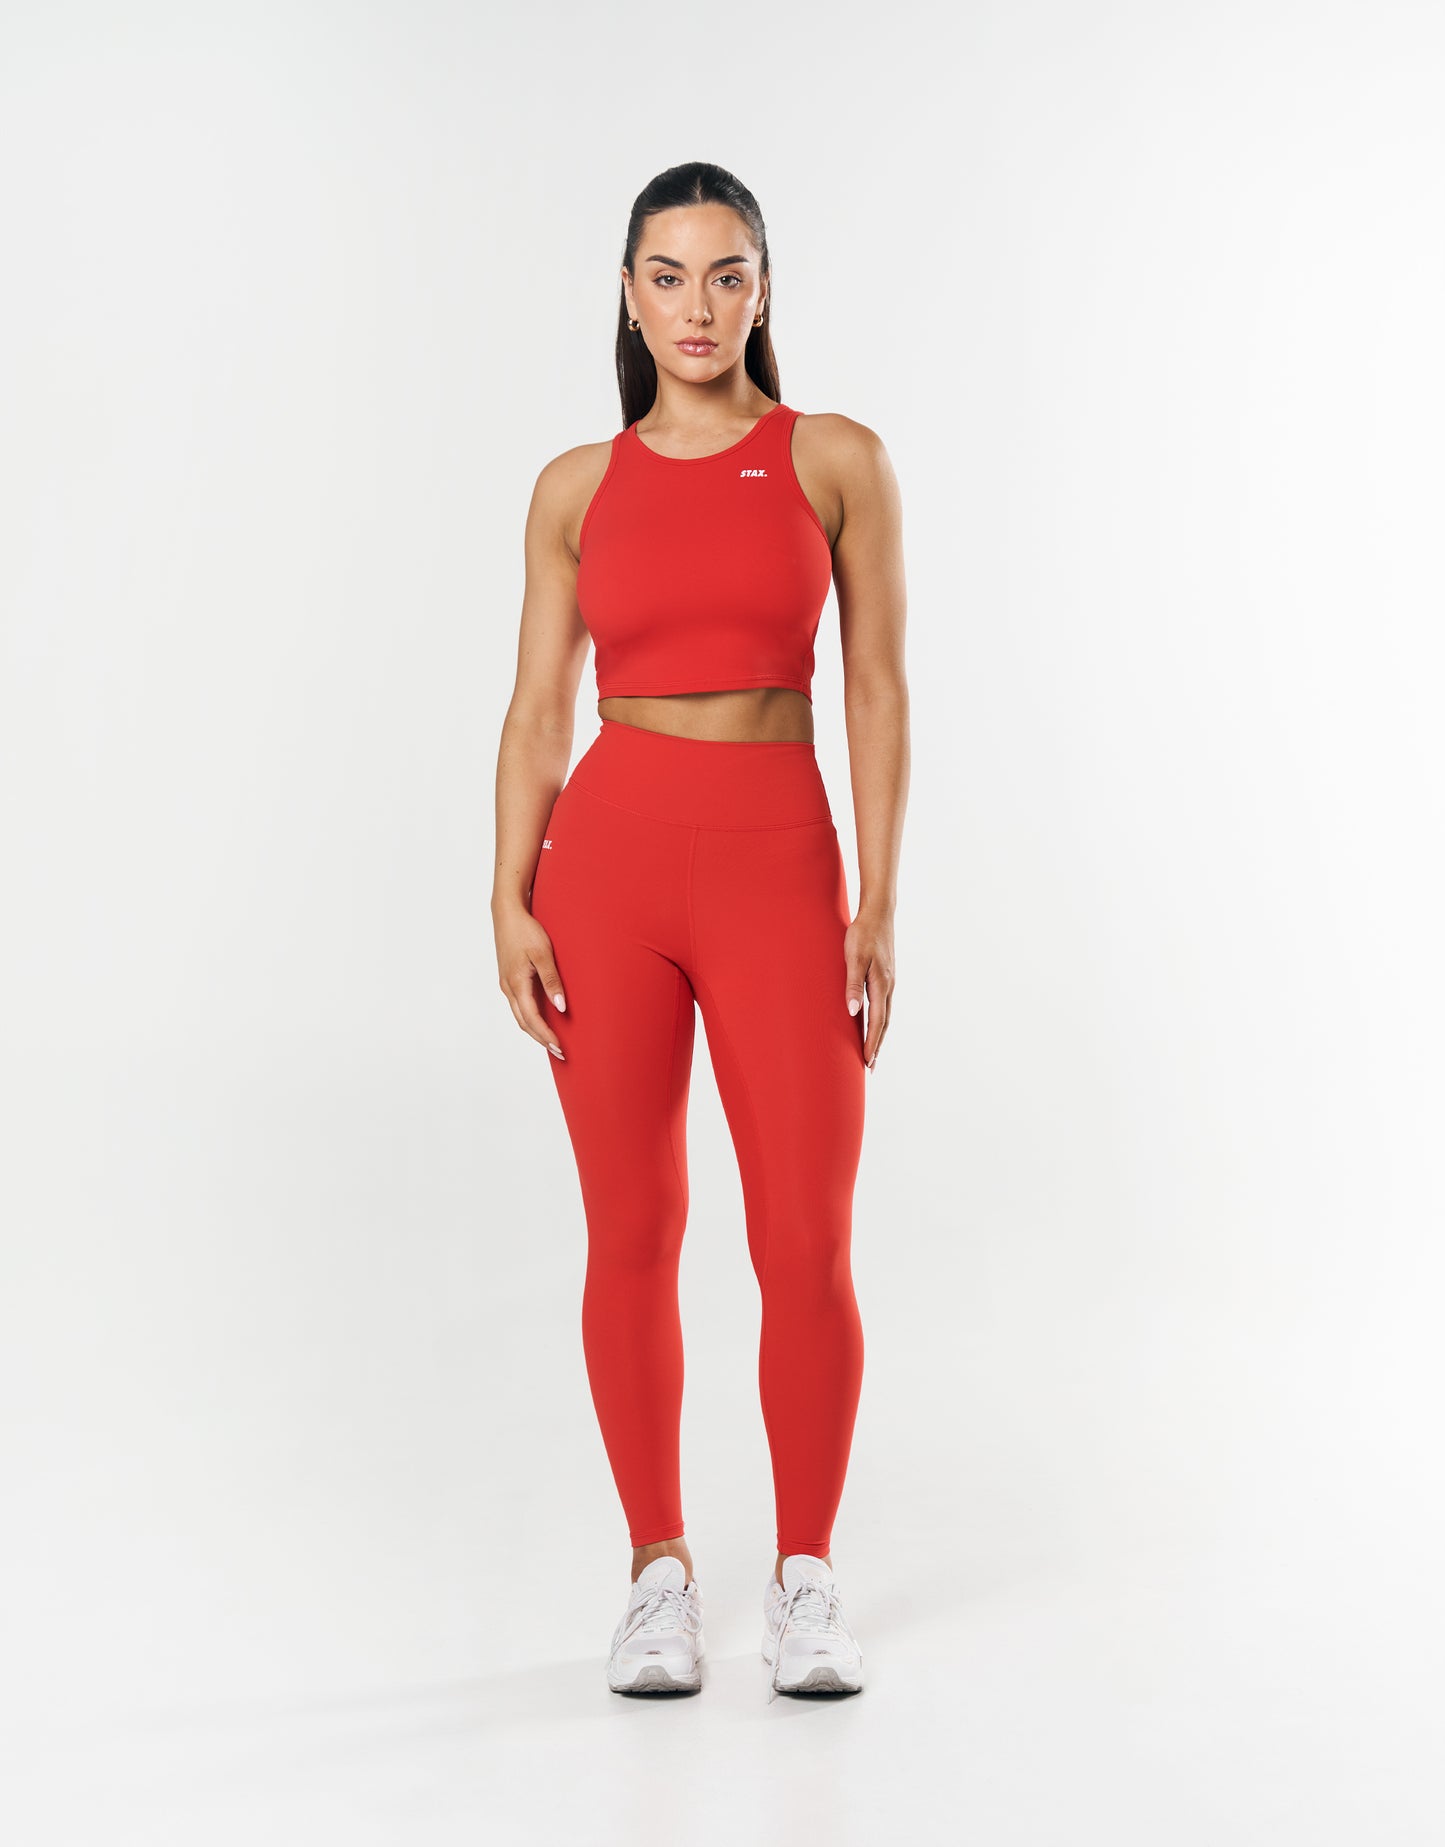 STAX. Cropped Tank NANDEX ™ -  Red